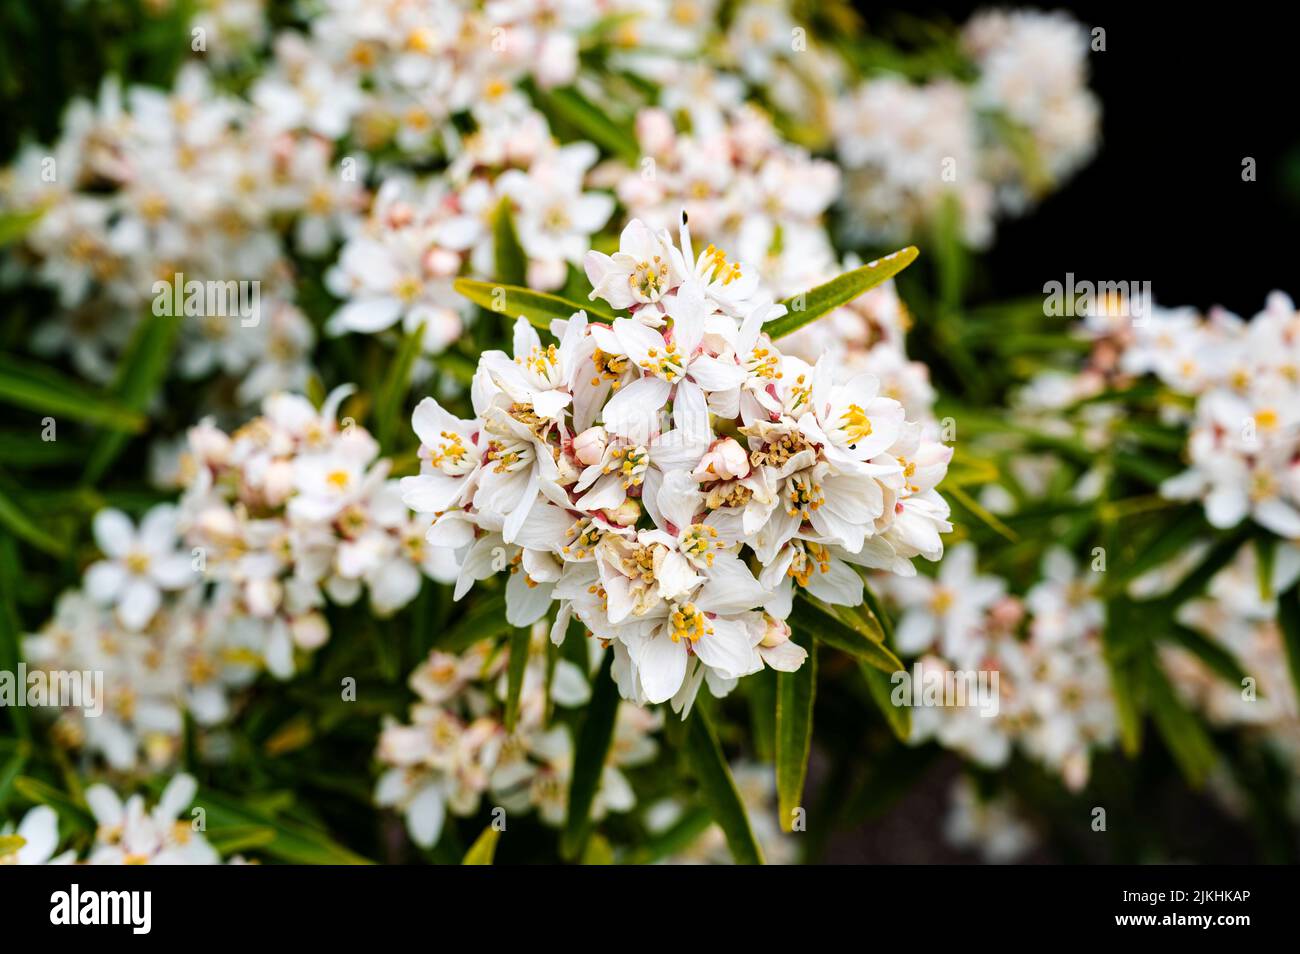 Choisya Dewitteana Aztec Pearl, Mexican orange Aztec Pearl, Rutaceae, Mexican orange blossom. Abundance of white blossom in spring. Stock Photo